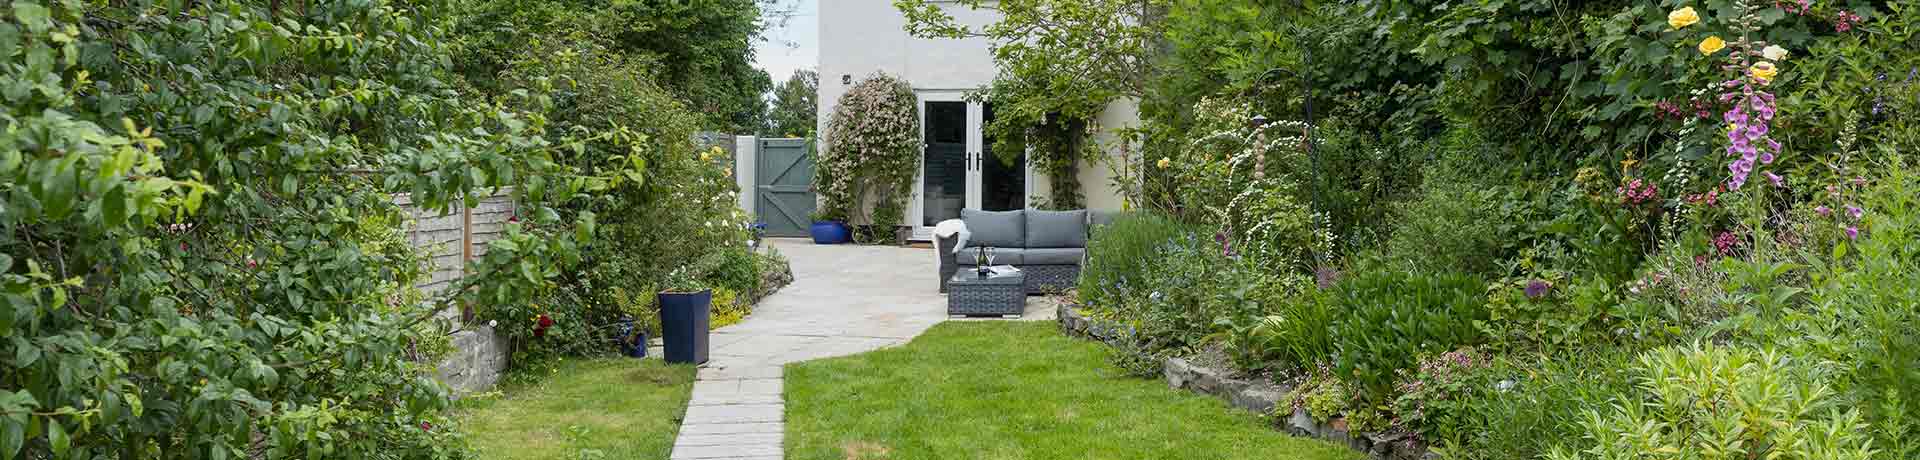 Dog friendly cottages in South England with an enclosed garden.